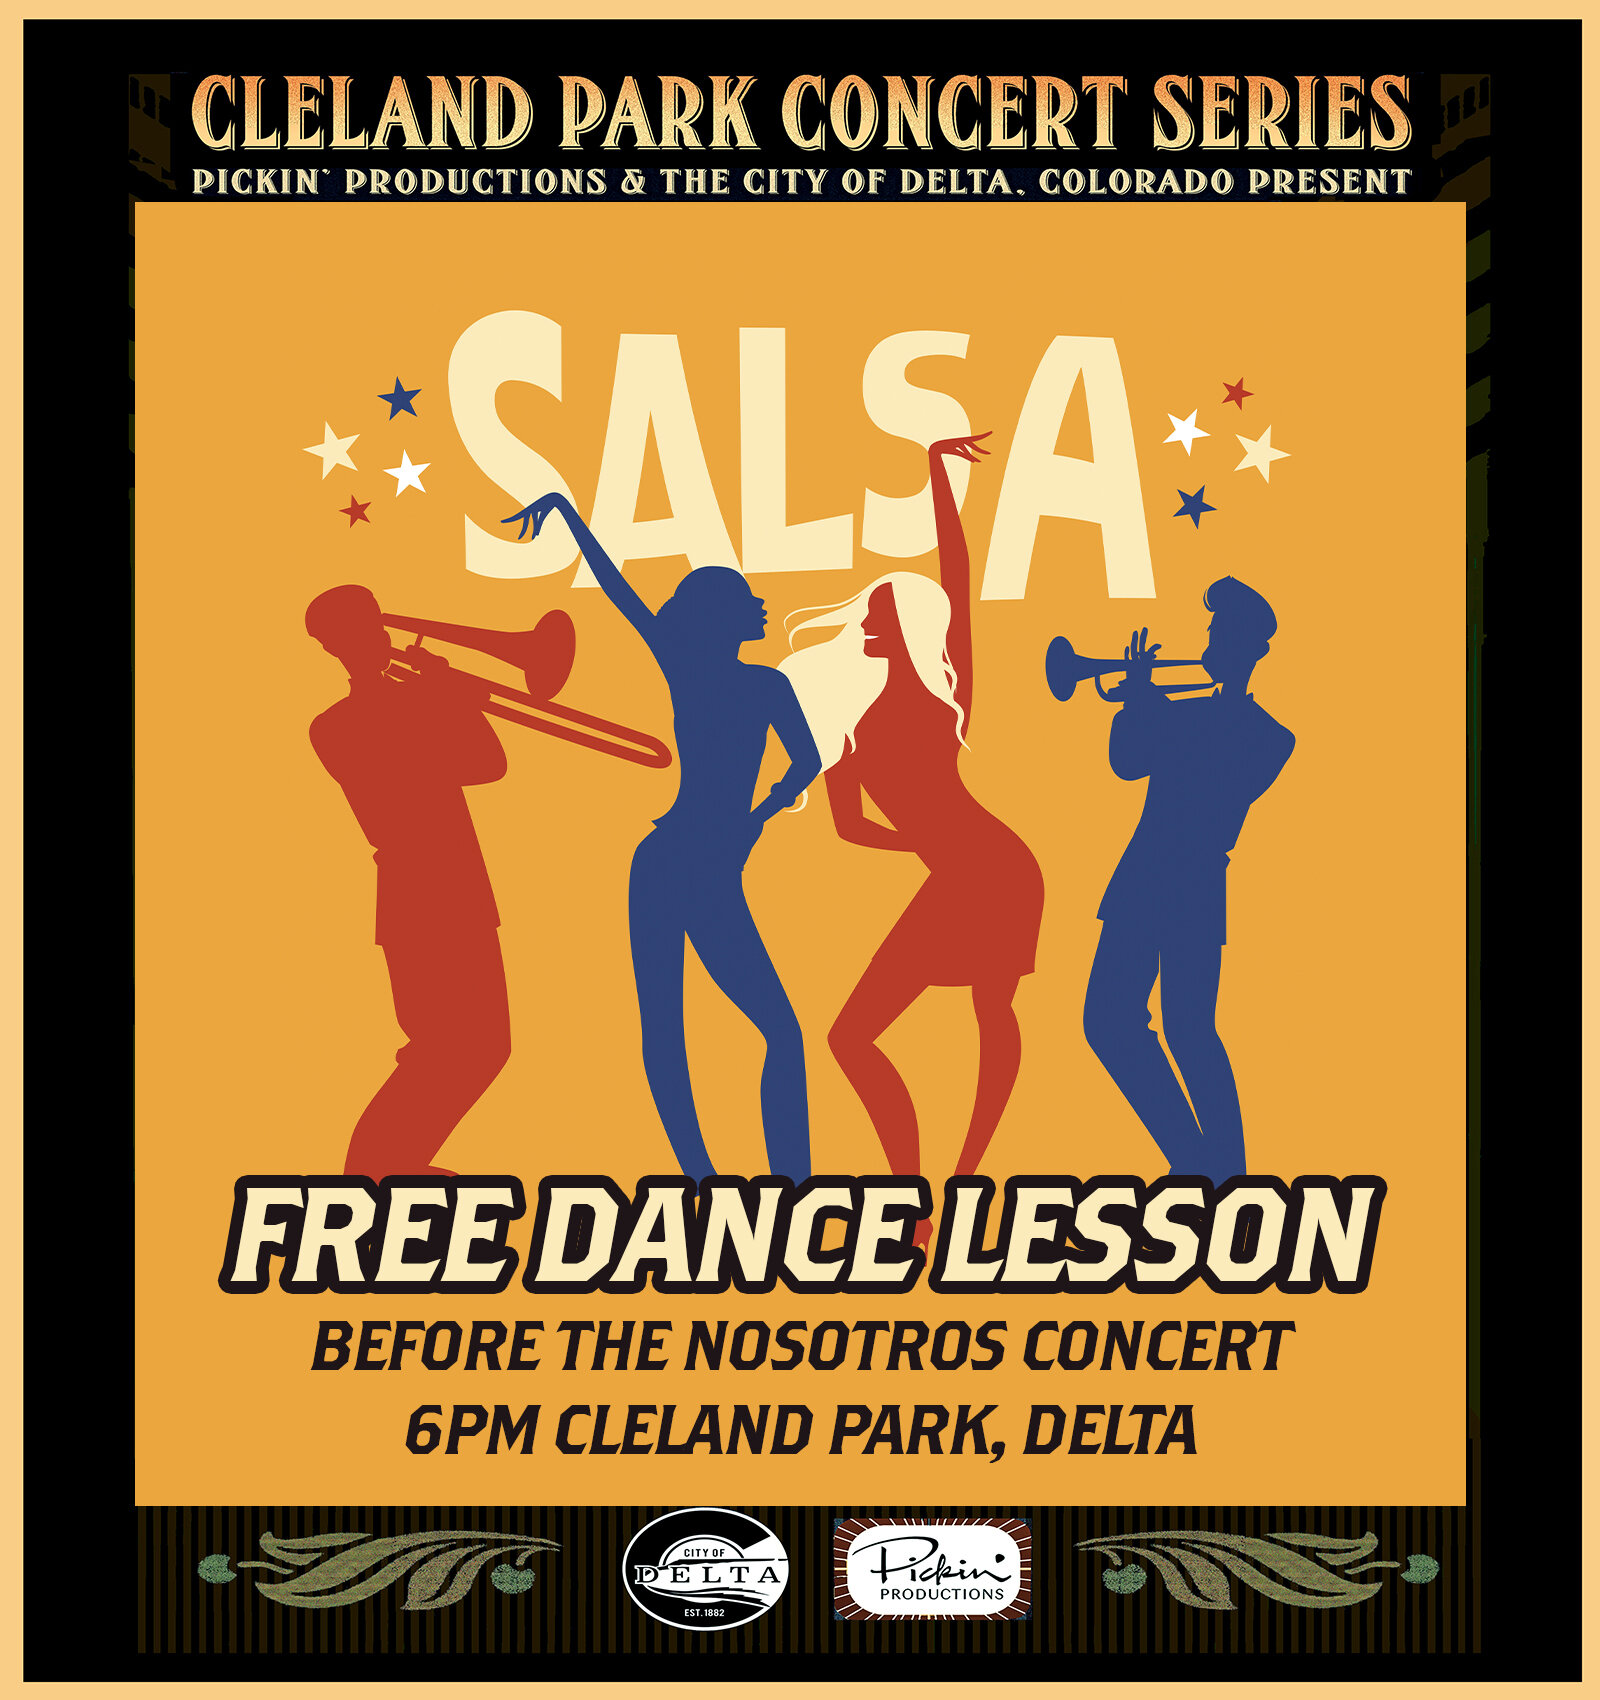 Join us for a free Salsa Dance Lesson before the Nosotros concert at Cleland Park in Delta on Wednesday 9/27 @ 6pm!

Presented by Pickin' Productions and City Delta Colorado.

#nosotrosmusic #concert #salsa #dance #lesson #free #clelandpark #deltacol